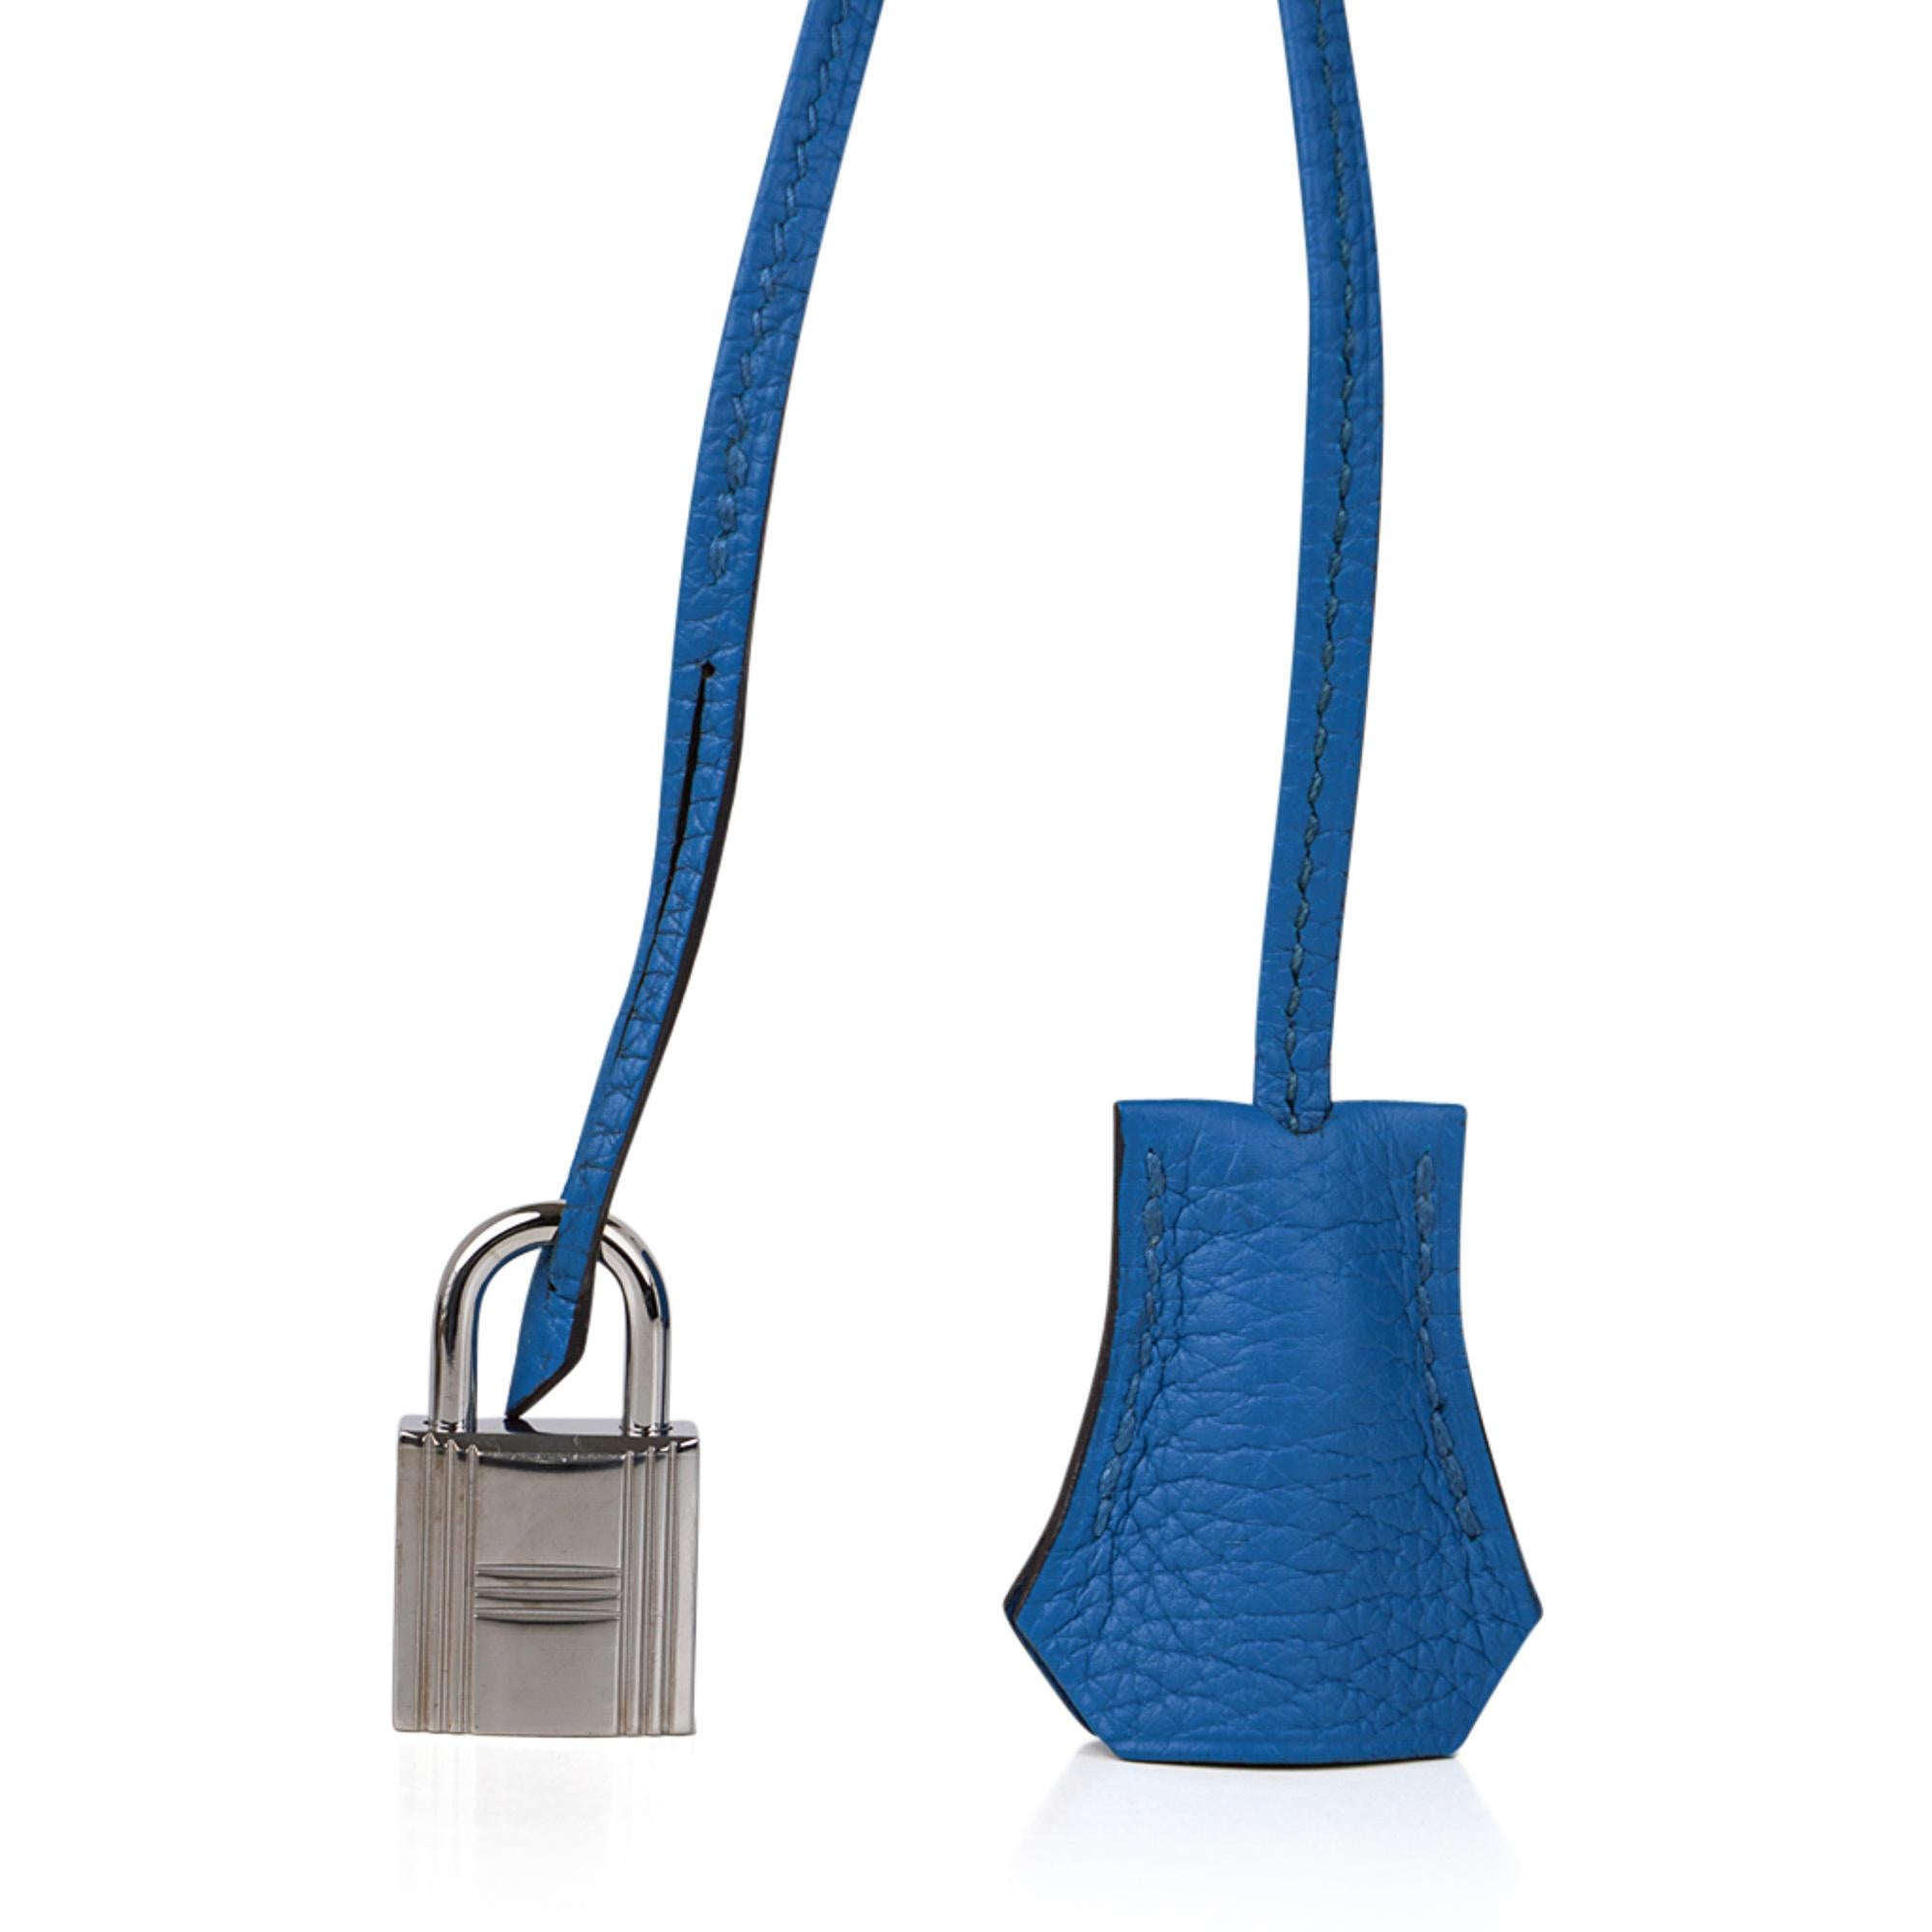 Mightychic offers a guaranteed authentic Hermes Birkin 35 bag featured in rich Bleu Izmir.
Accentuated with fresch palladium hardware.
This is a stunning, saturated vibrant Blue.
Rich Clemence leather is textured and highly scratch resistant. 